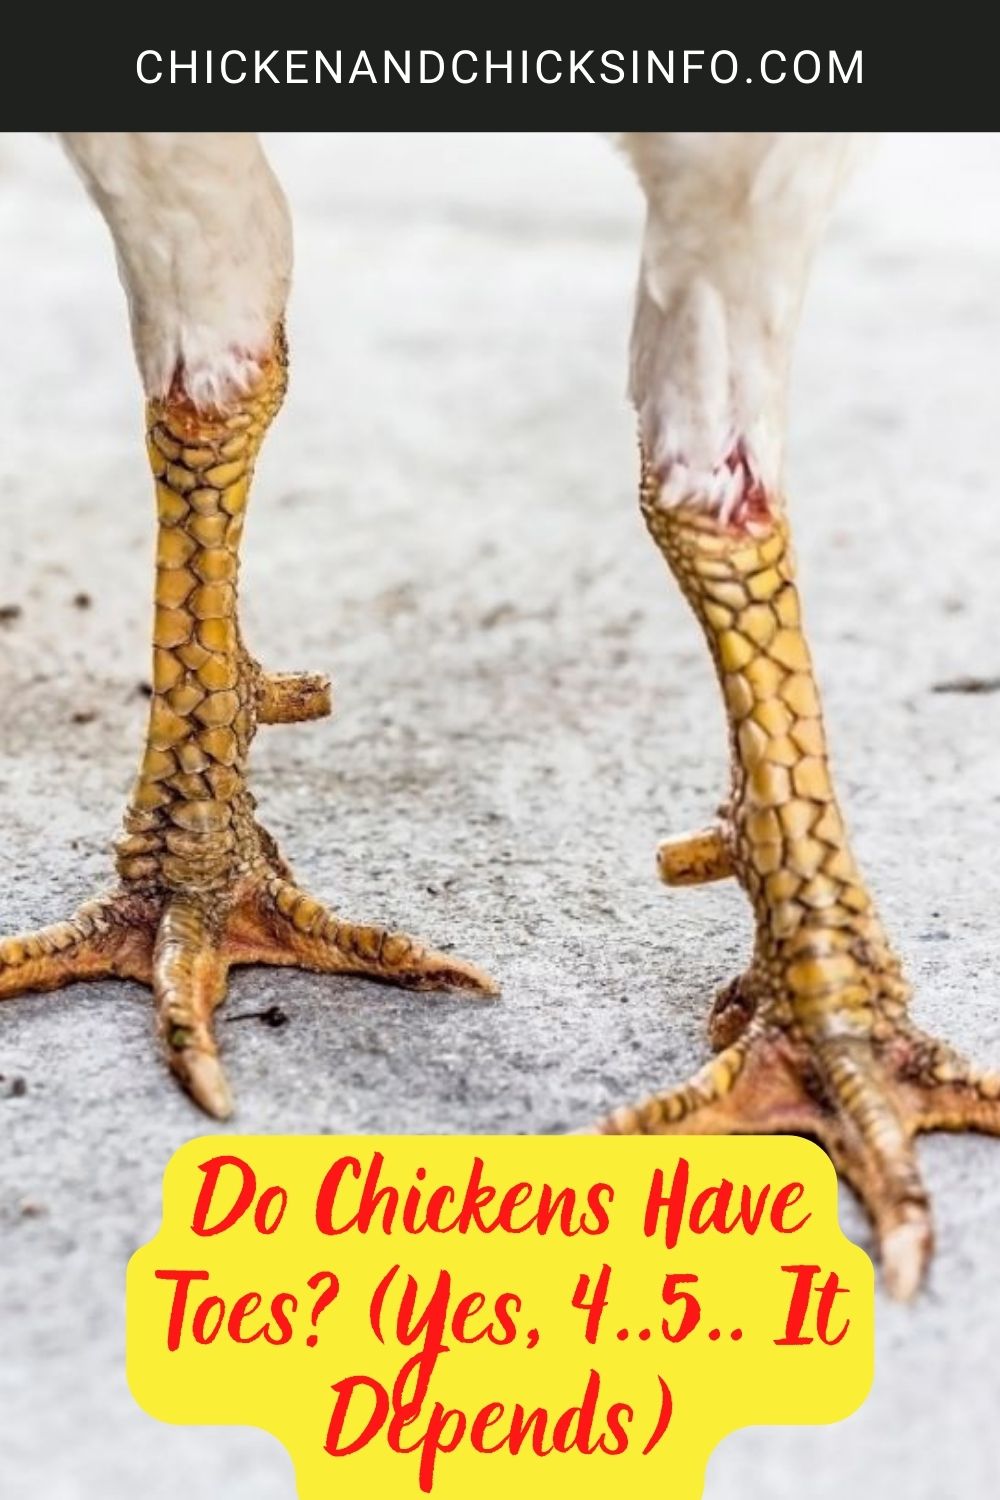 Do Chickens Have Toes? (Yes, 4..5.. It Depends) poster.
